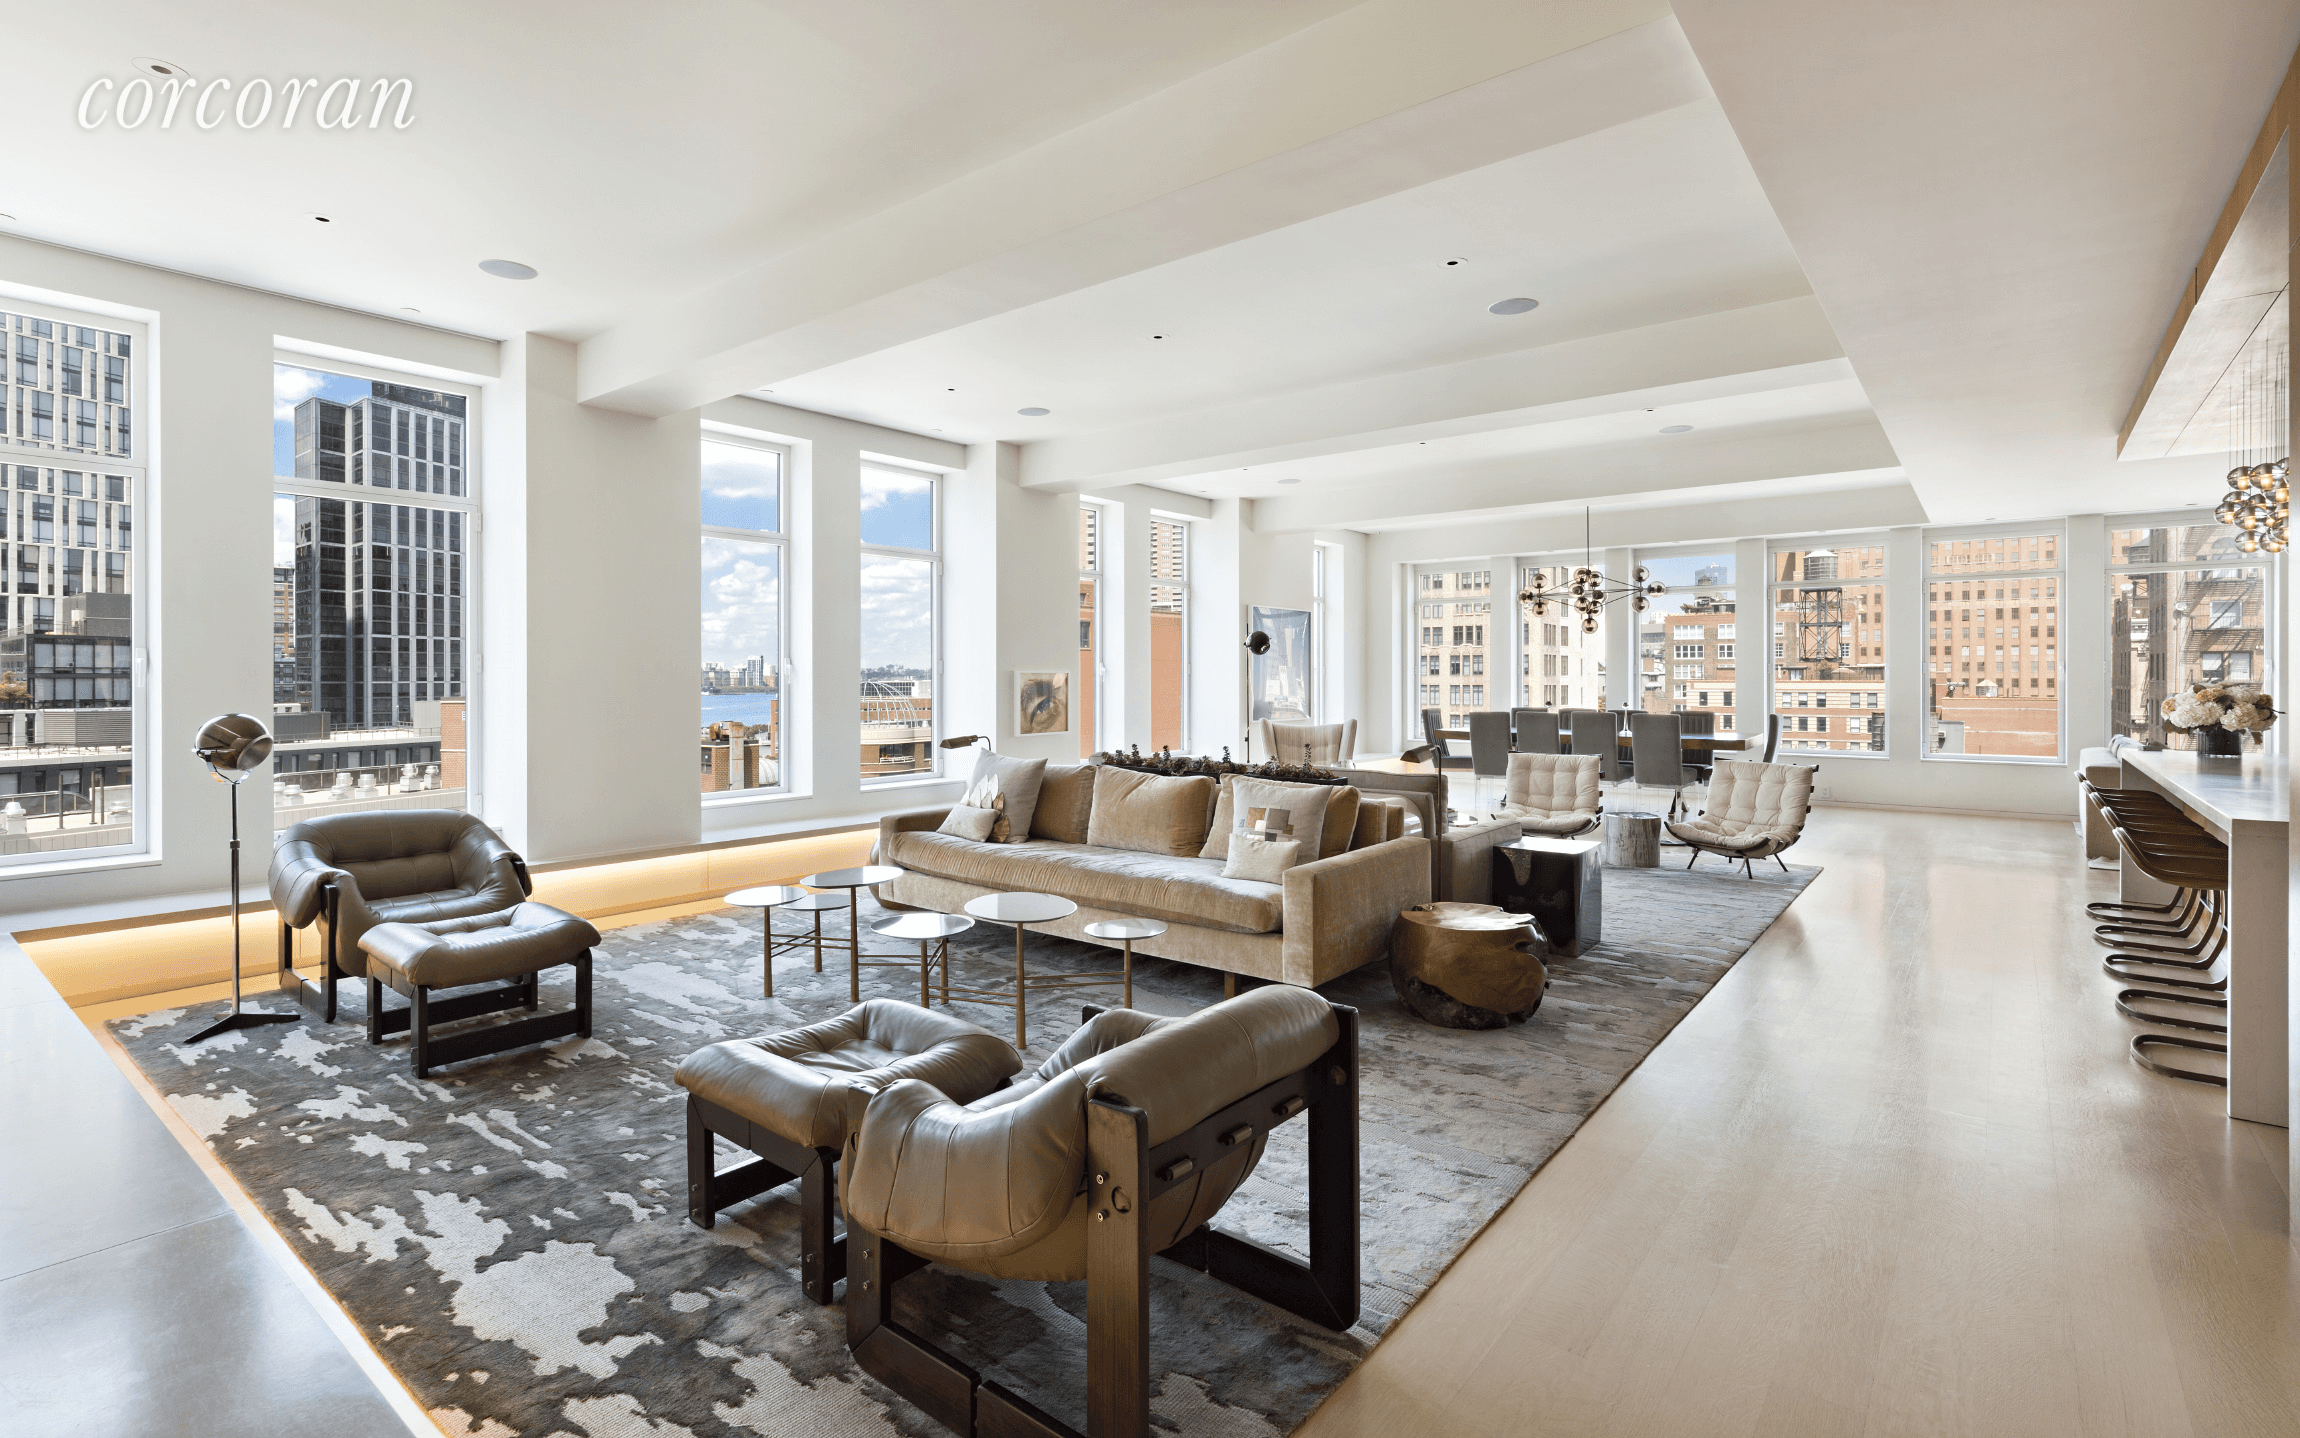 Live and entertain on a grand scale in this 4, 000 square foot mint condition TriBeCa loft.